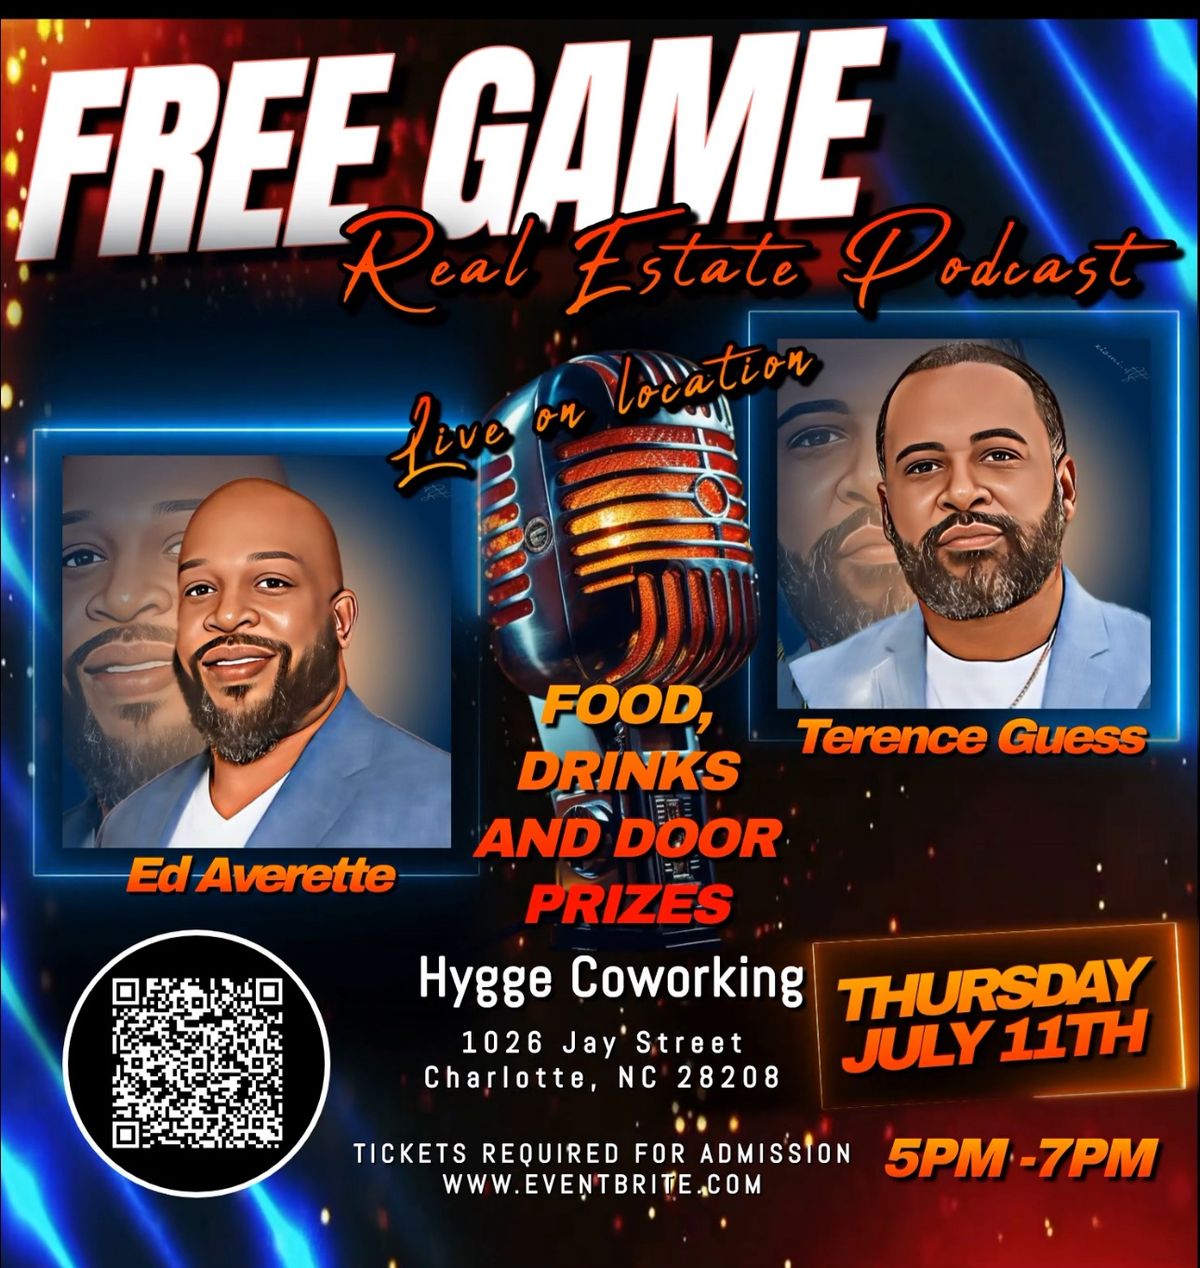 Live Taping of Free Game Real Estate podcast